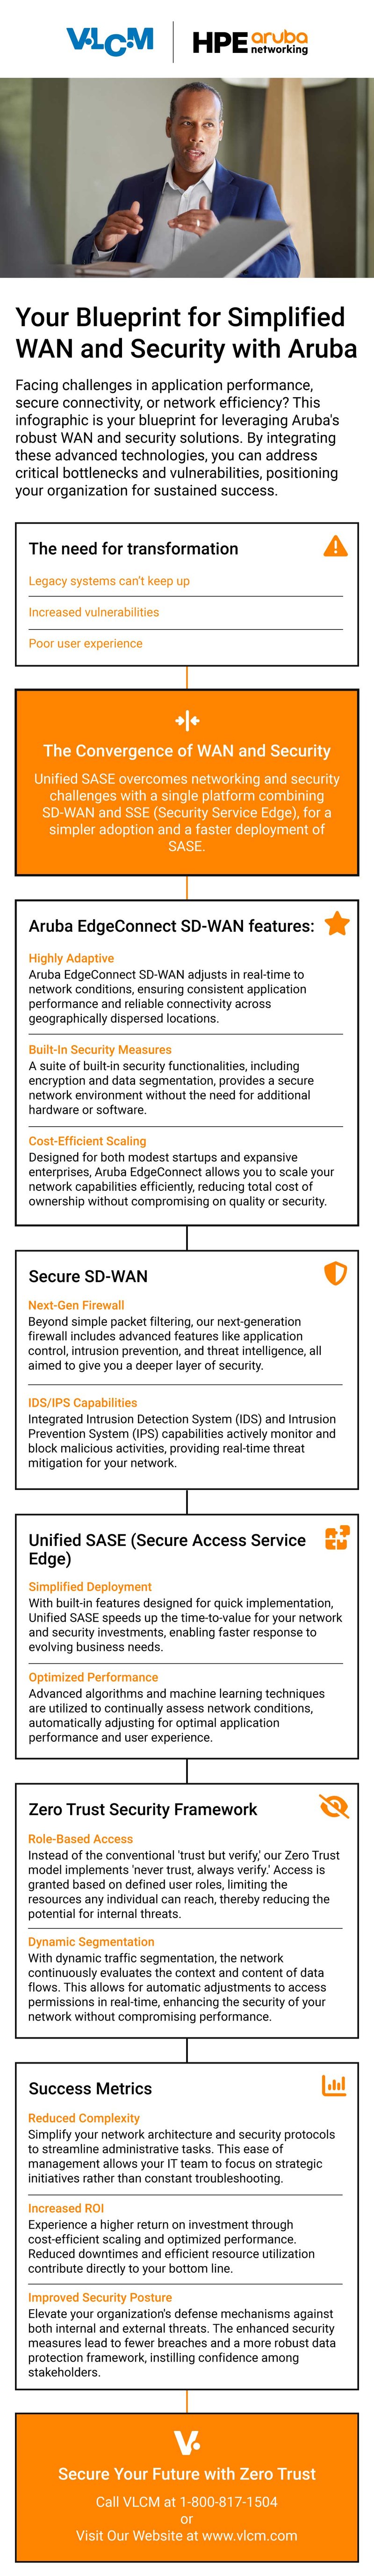 HPE-Aruba-Networking-WAN-and-Security-Transformation-Infographic